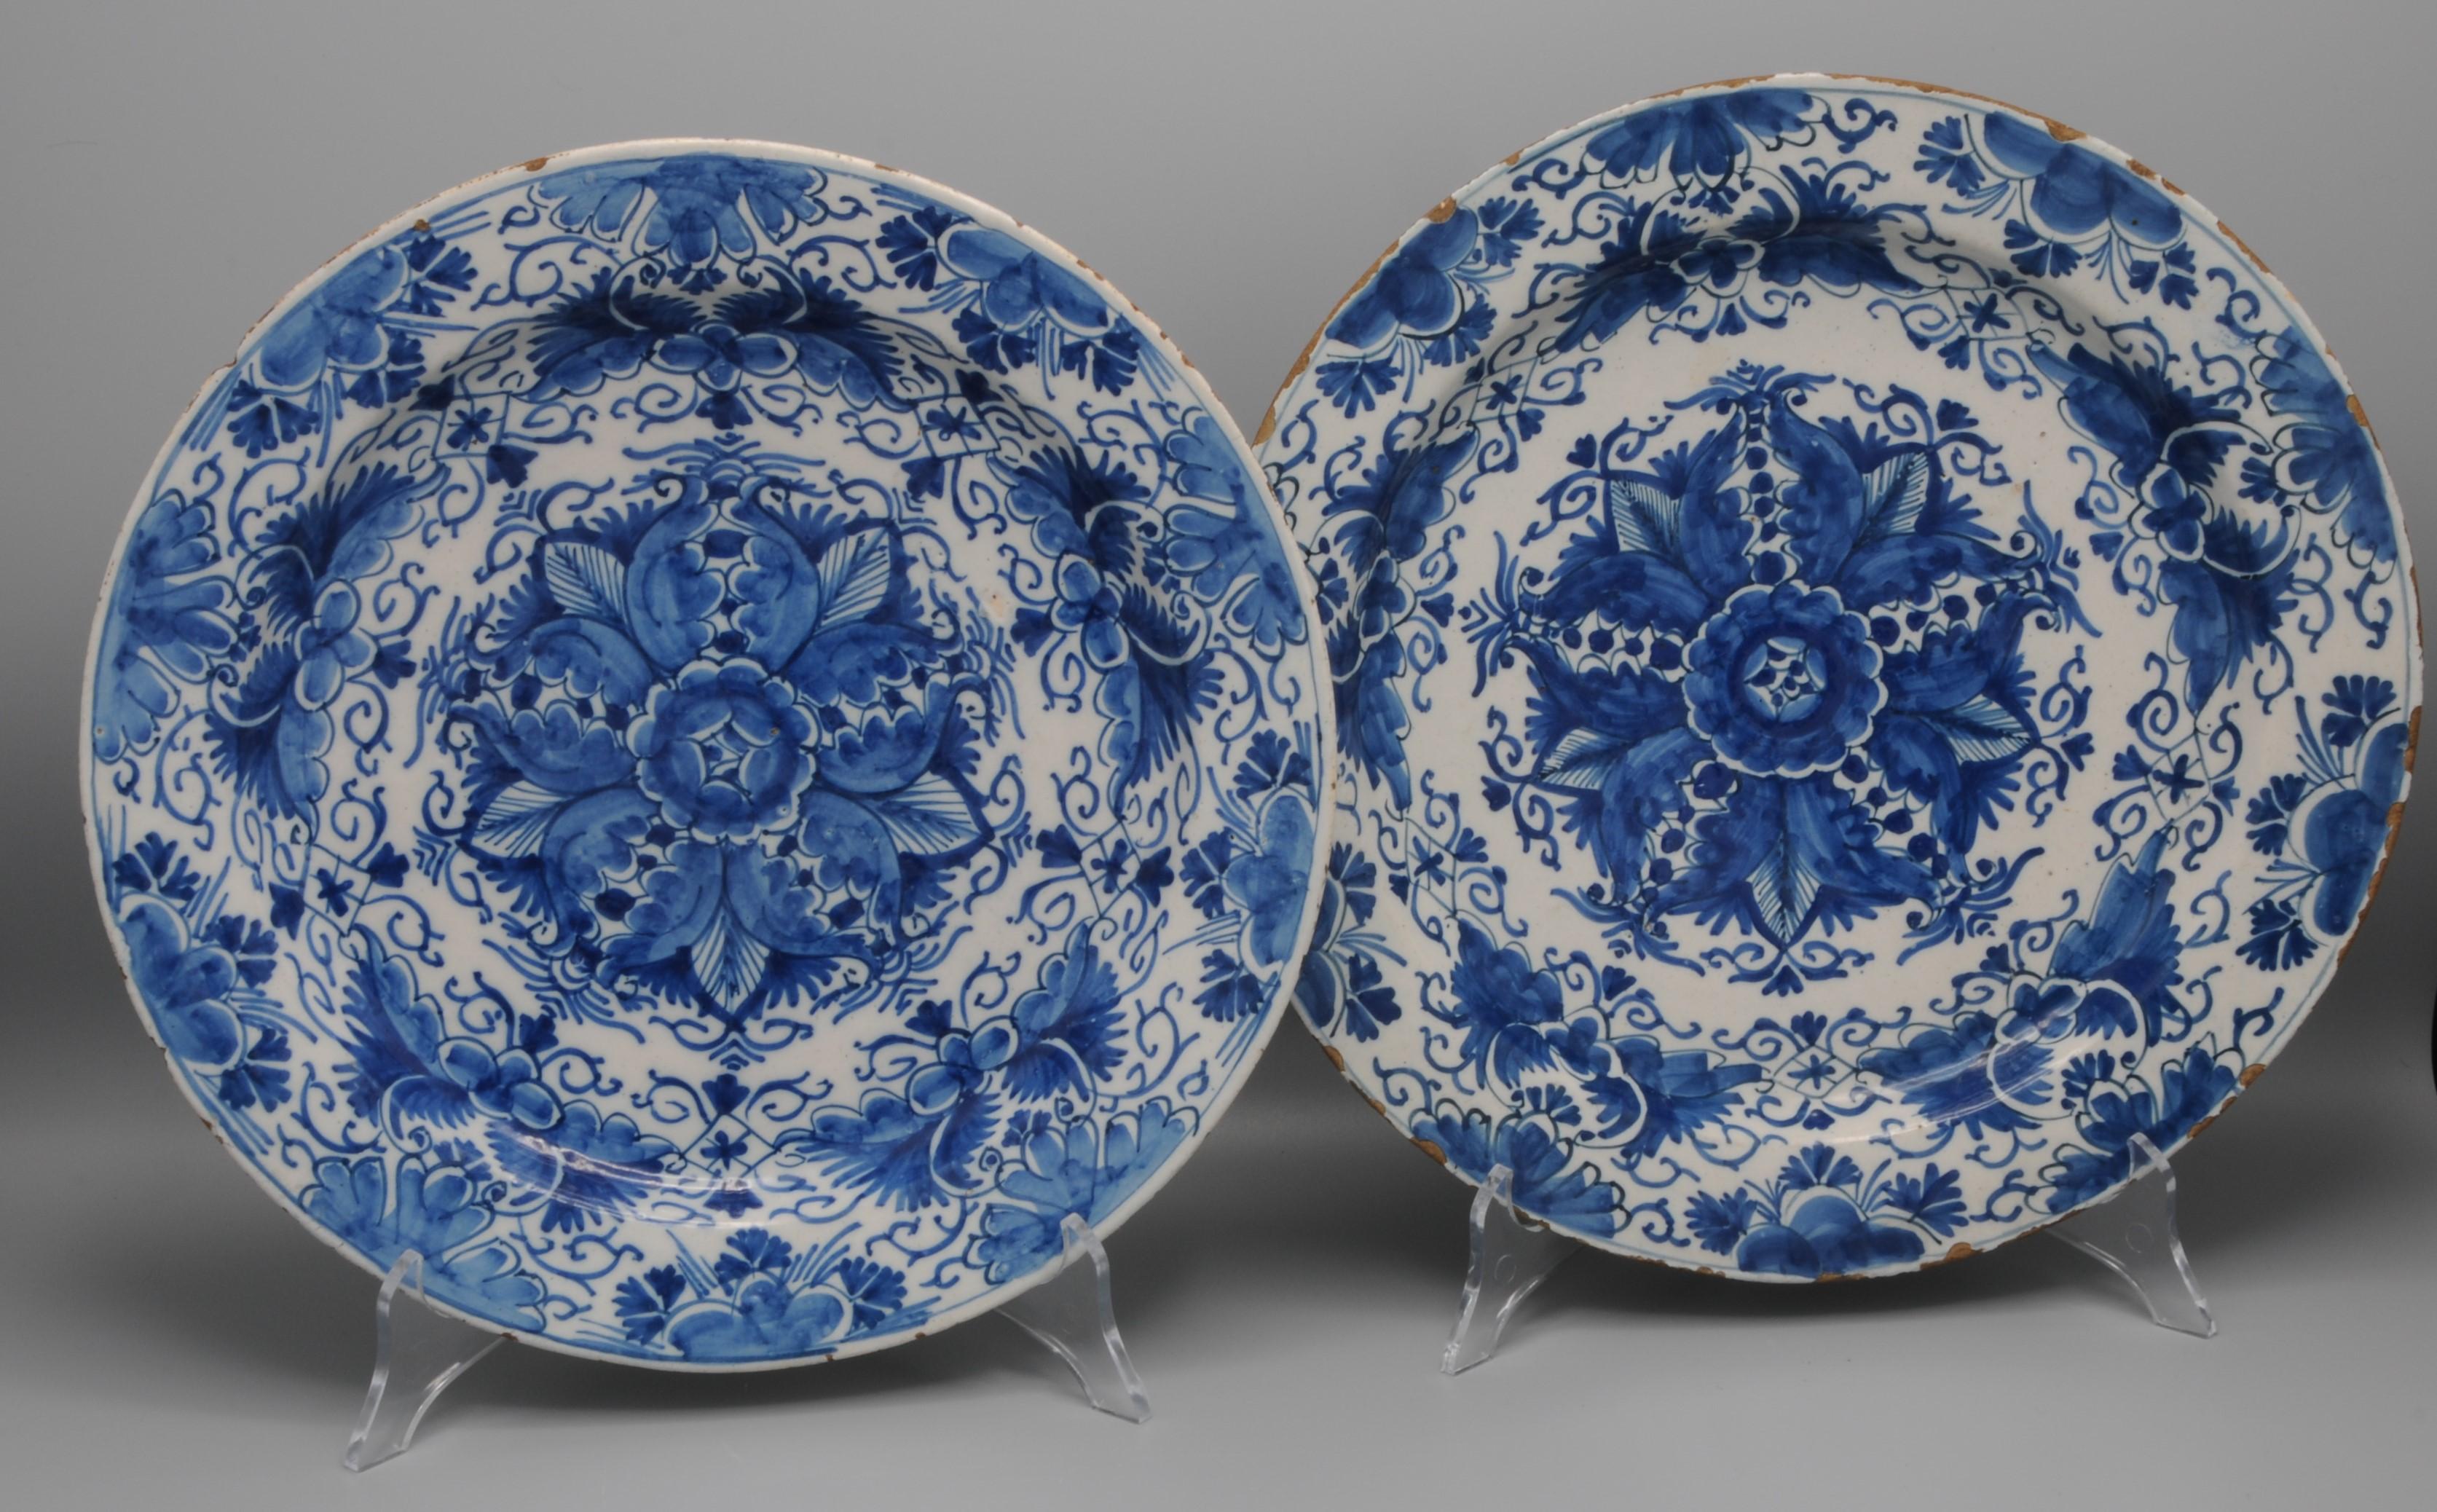 Glazed Delft - Pair of dishes - 18th century  For Sale